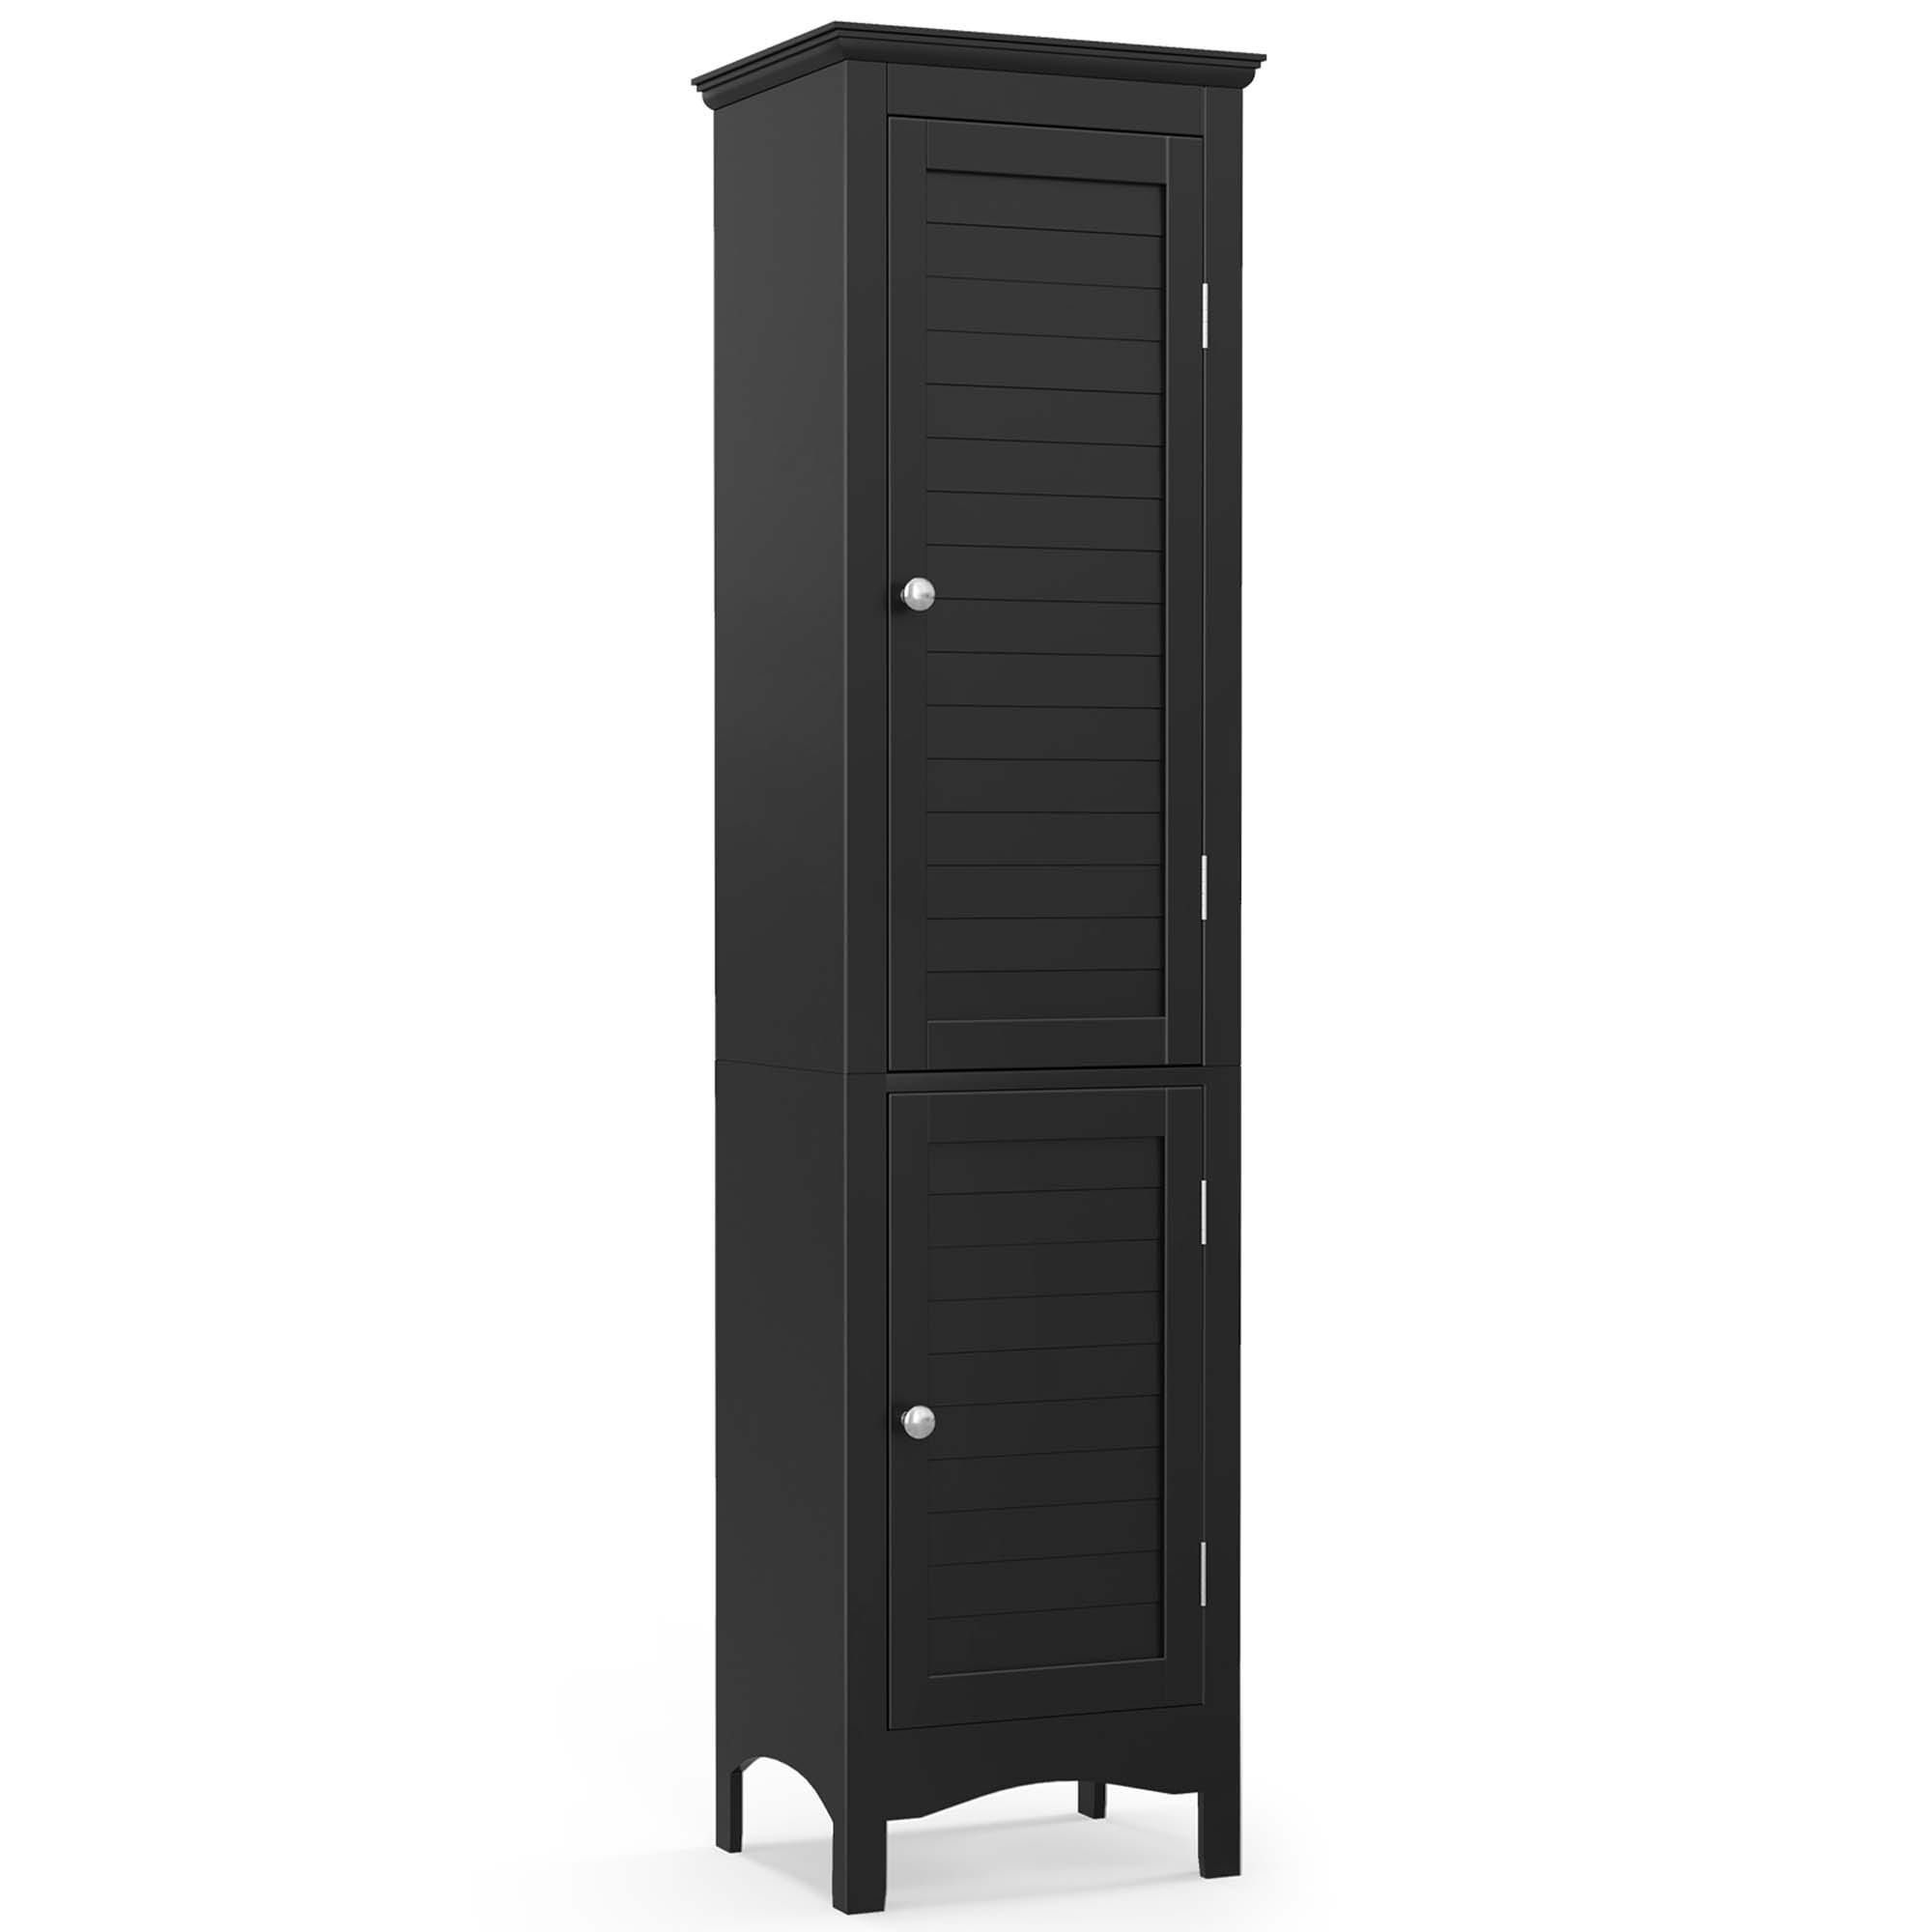 https://ak1.ostkcdn.com/images/products/is/images/direct/3d3e1c89b726d4363ca15664f4cd8abd35a10e42/Costway-Tall-Bathroom-Floor-Cabinet-Narrow-Linen-Tower-with-2-Doors-%26.jpg